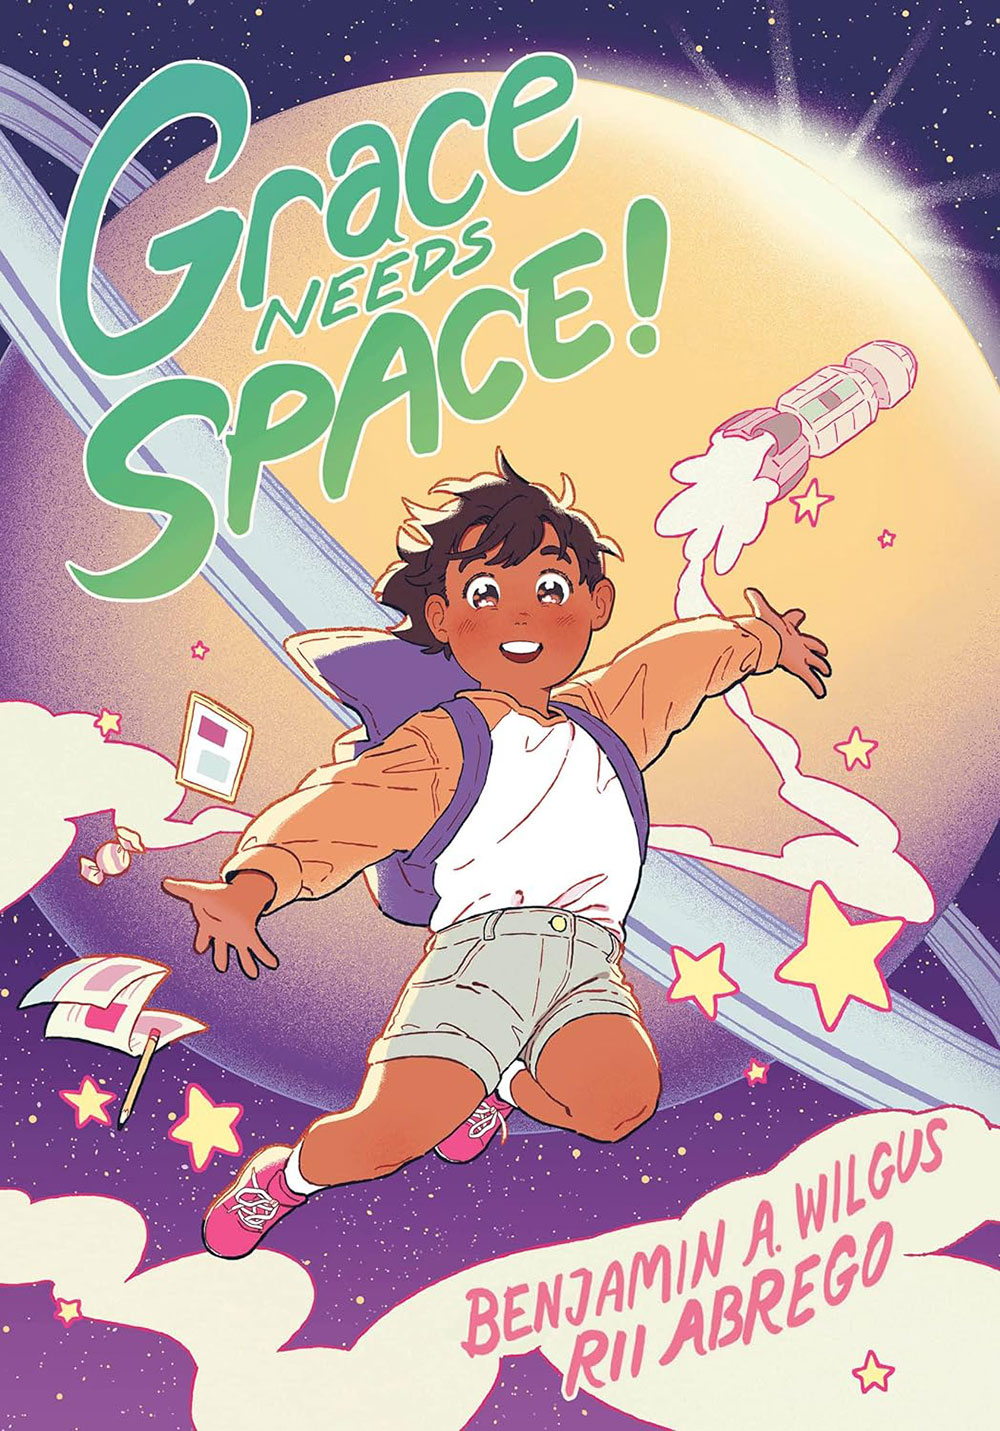 Book cover for Grace Needs Space! by Benjamin A. Wilgus and Rii Abrego